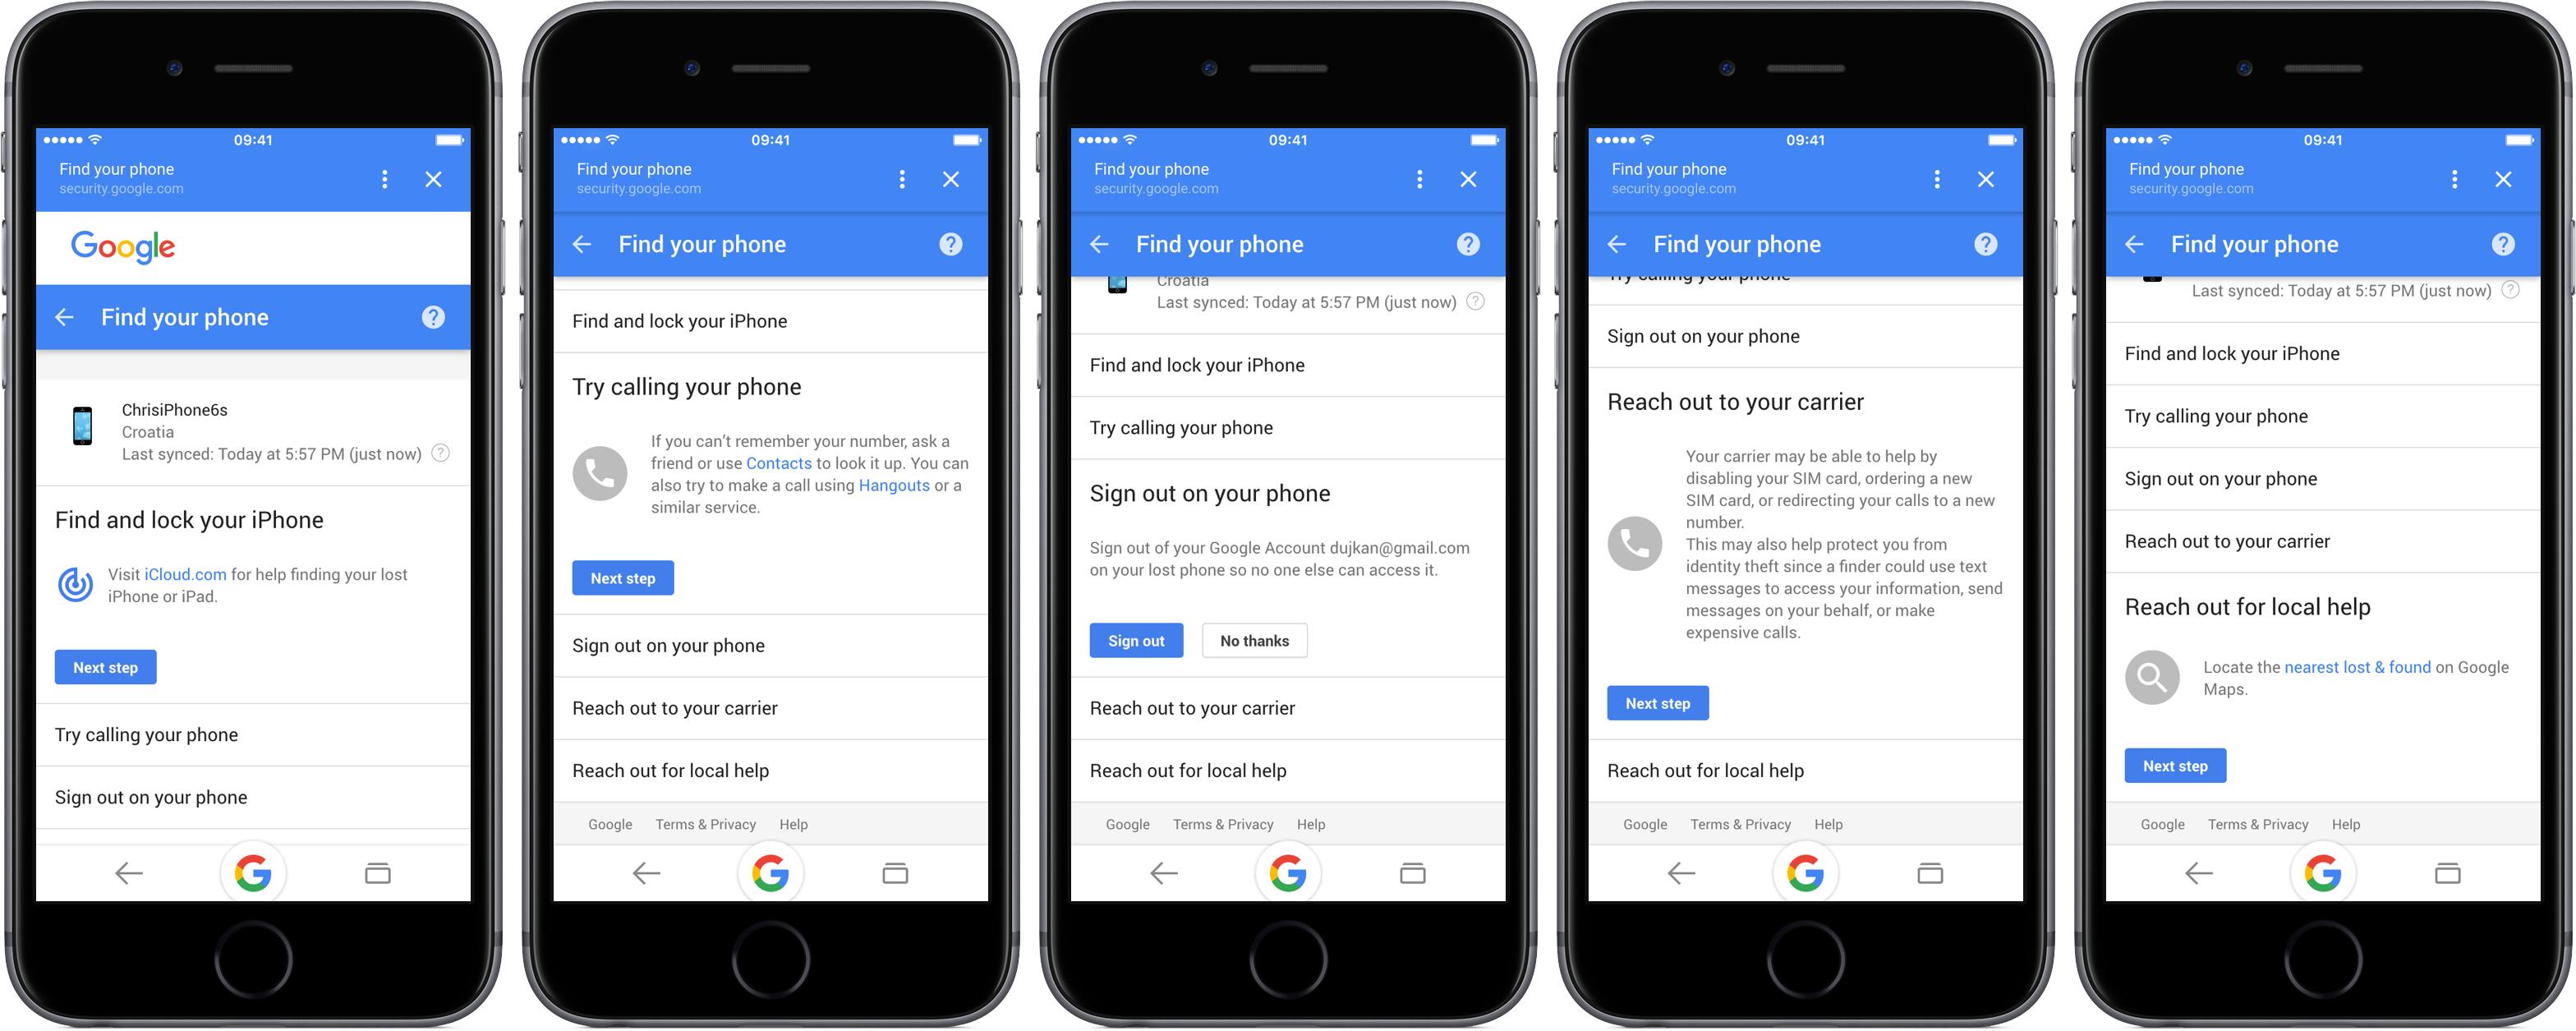 Google's My Account webpage rolls out Find My iPhonelike